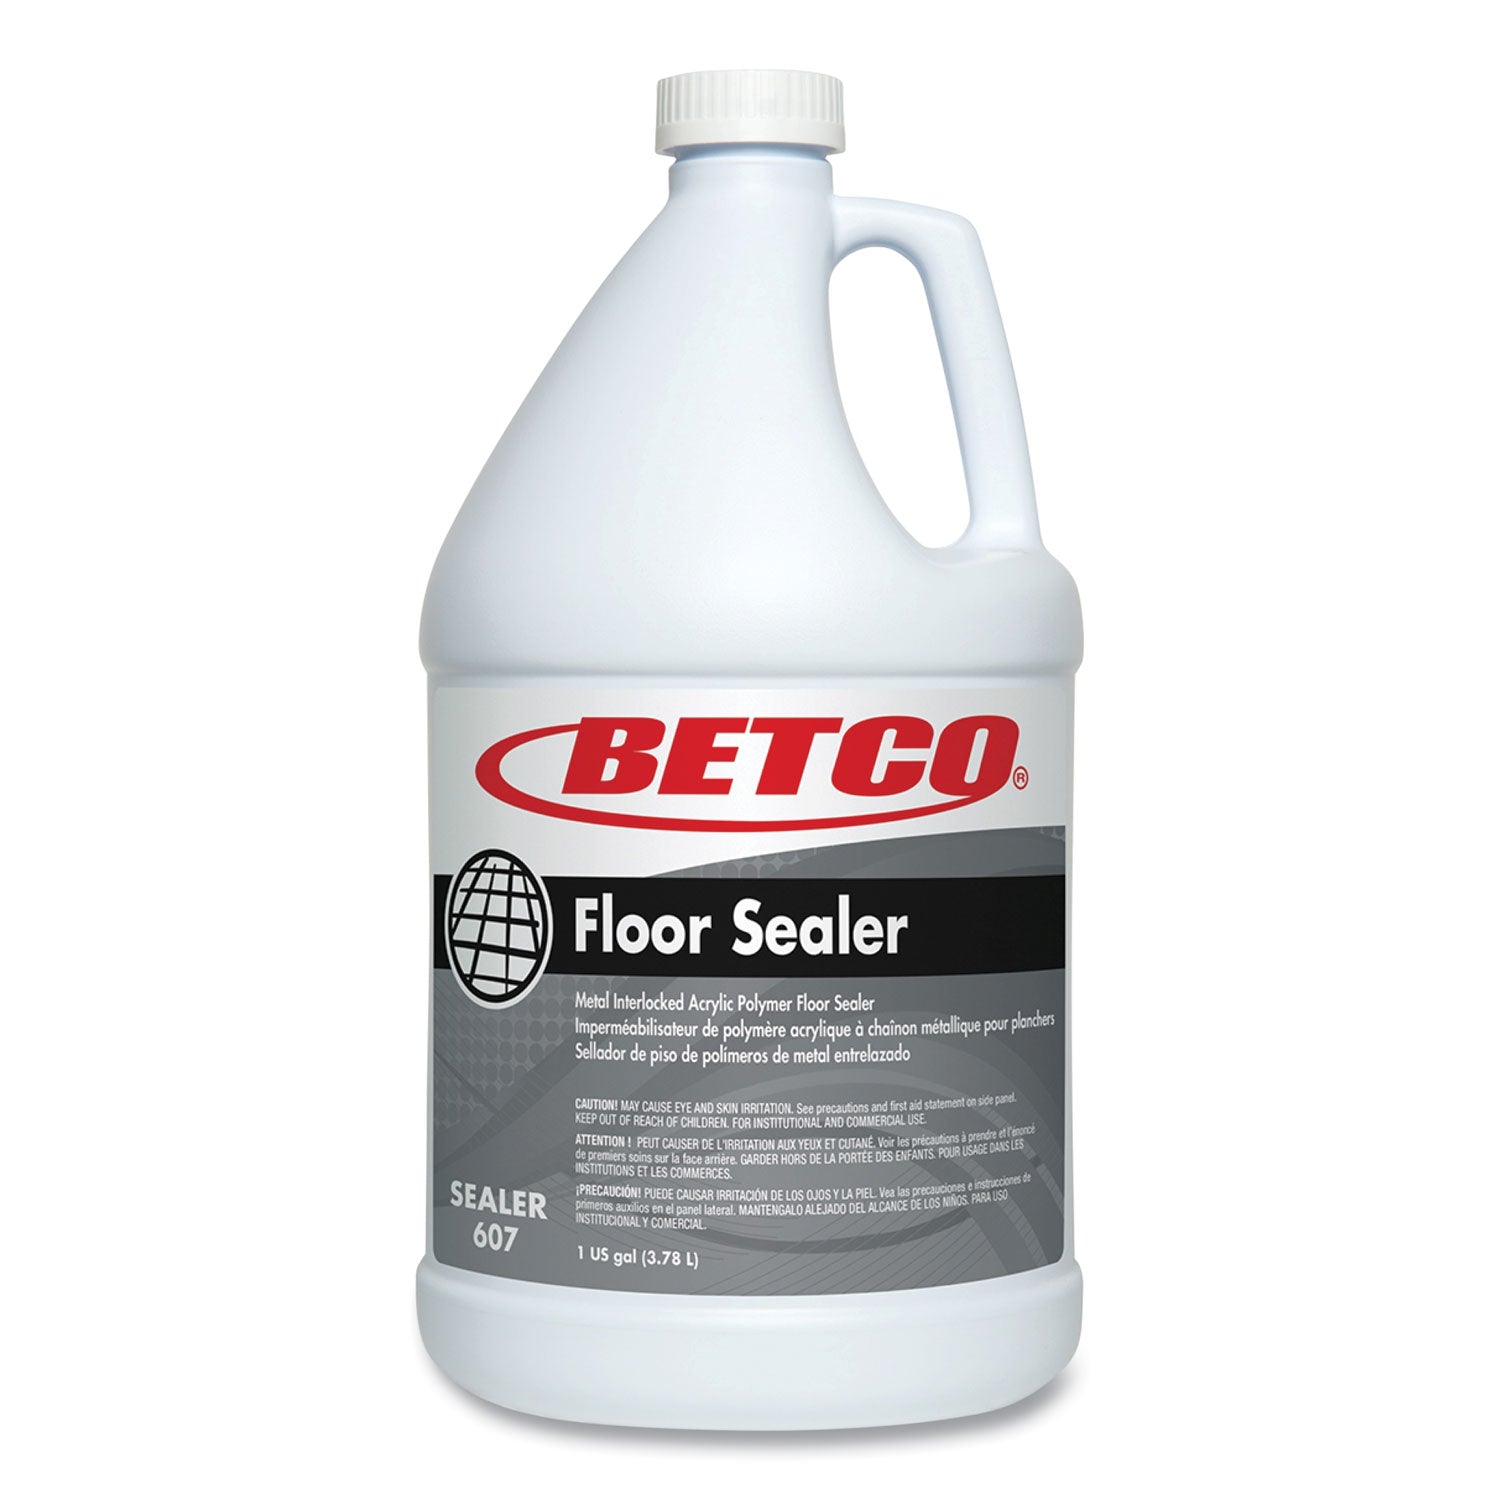 Betco Acrylic Floor Sealer - 128 fl oz (4 quart) - Characteristic Scent - 1 Each - Unscented, Water Based, Durable, Non-yellowing, Non-powdering - Clear, Milky White - 1